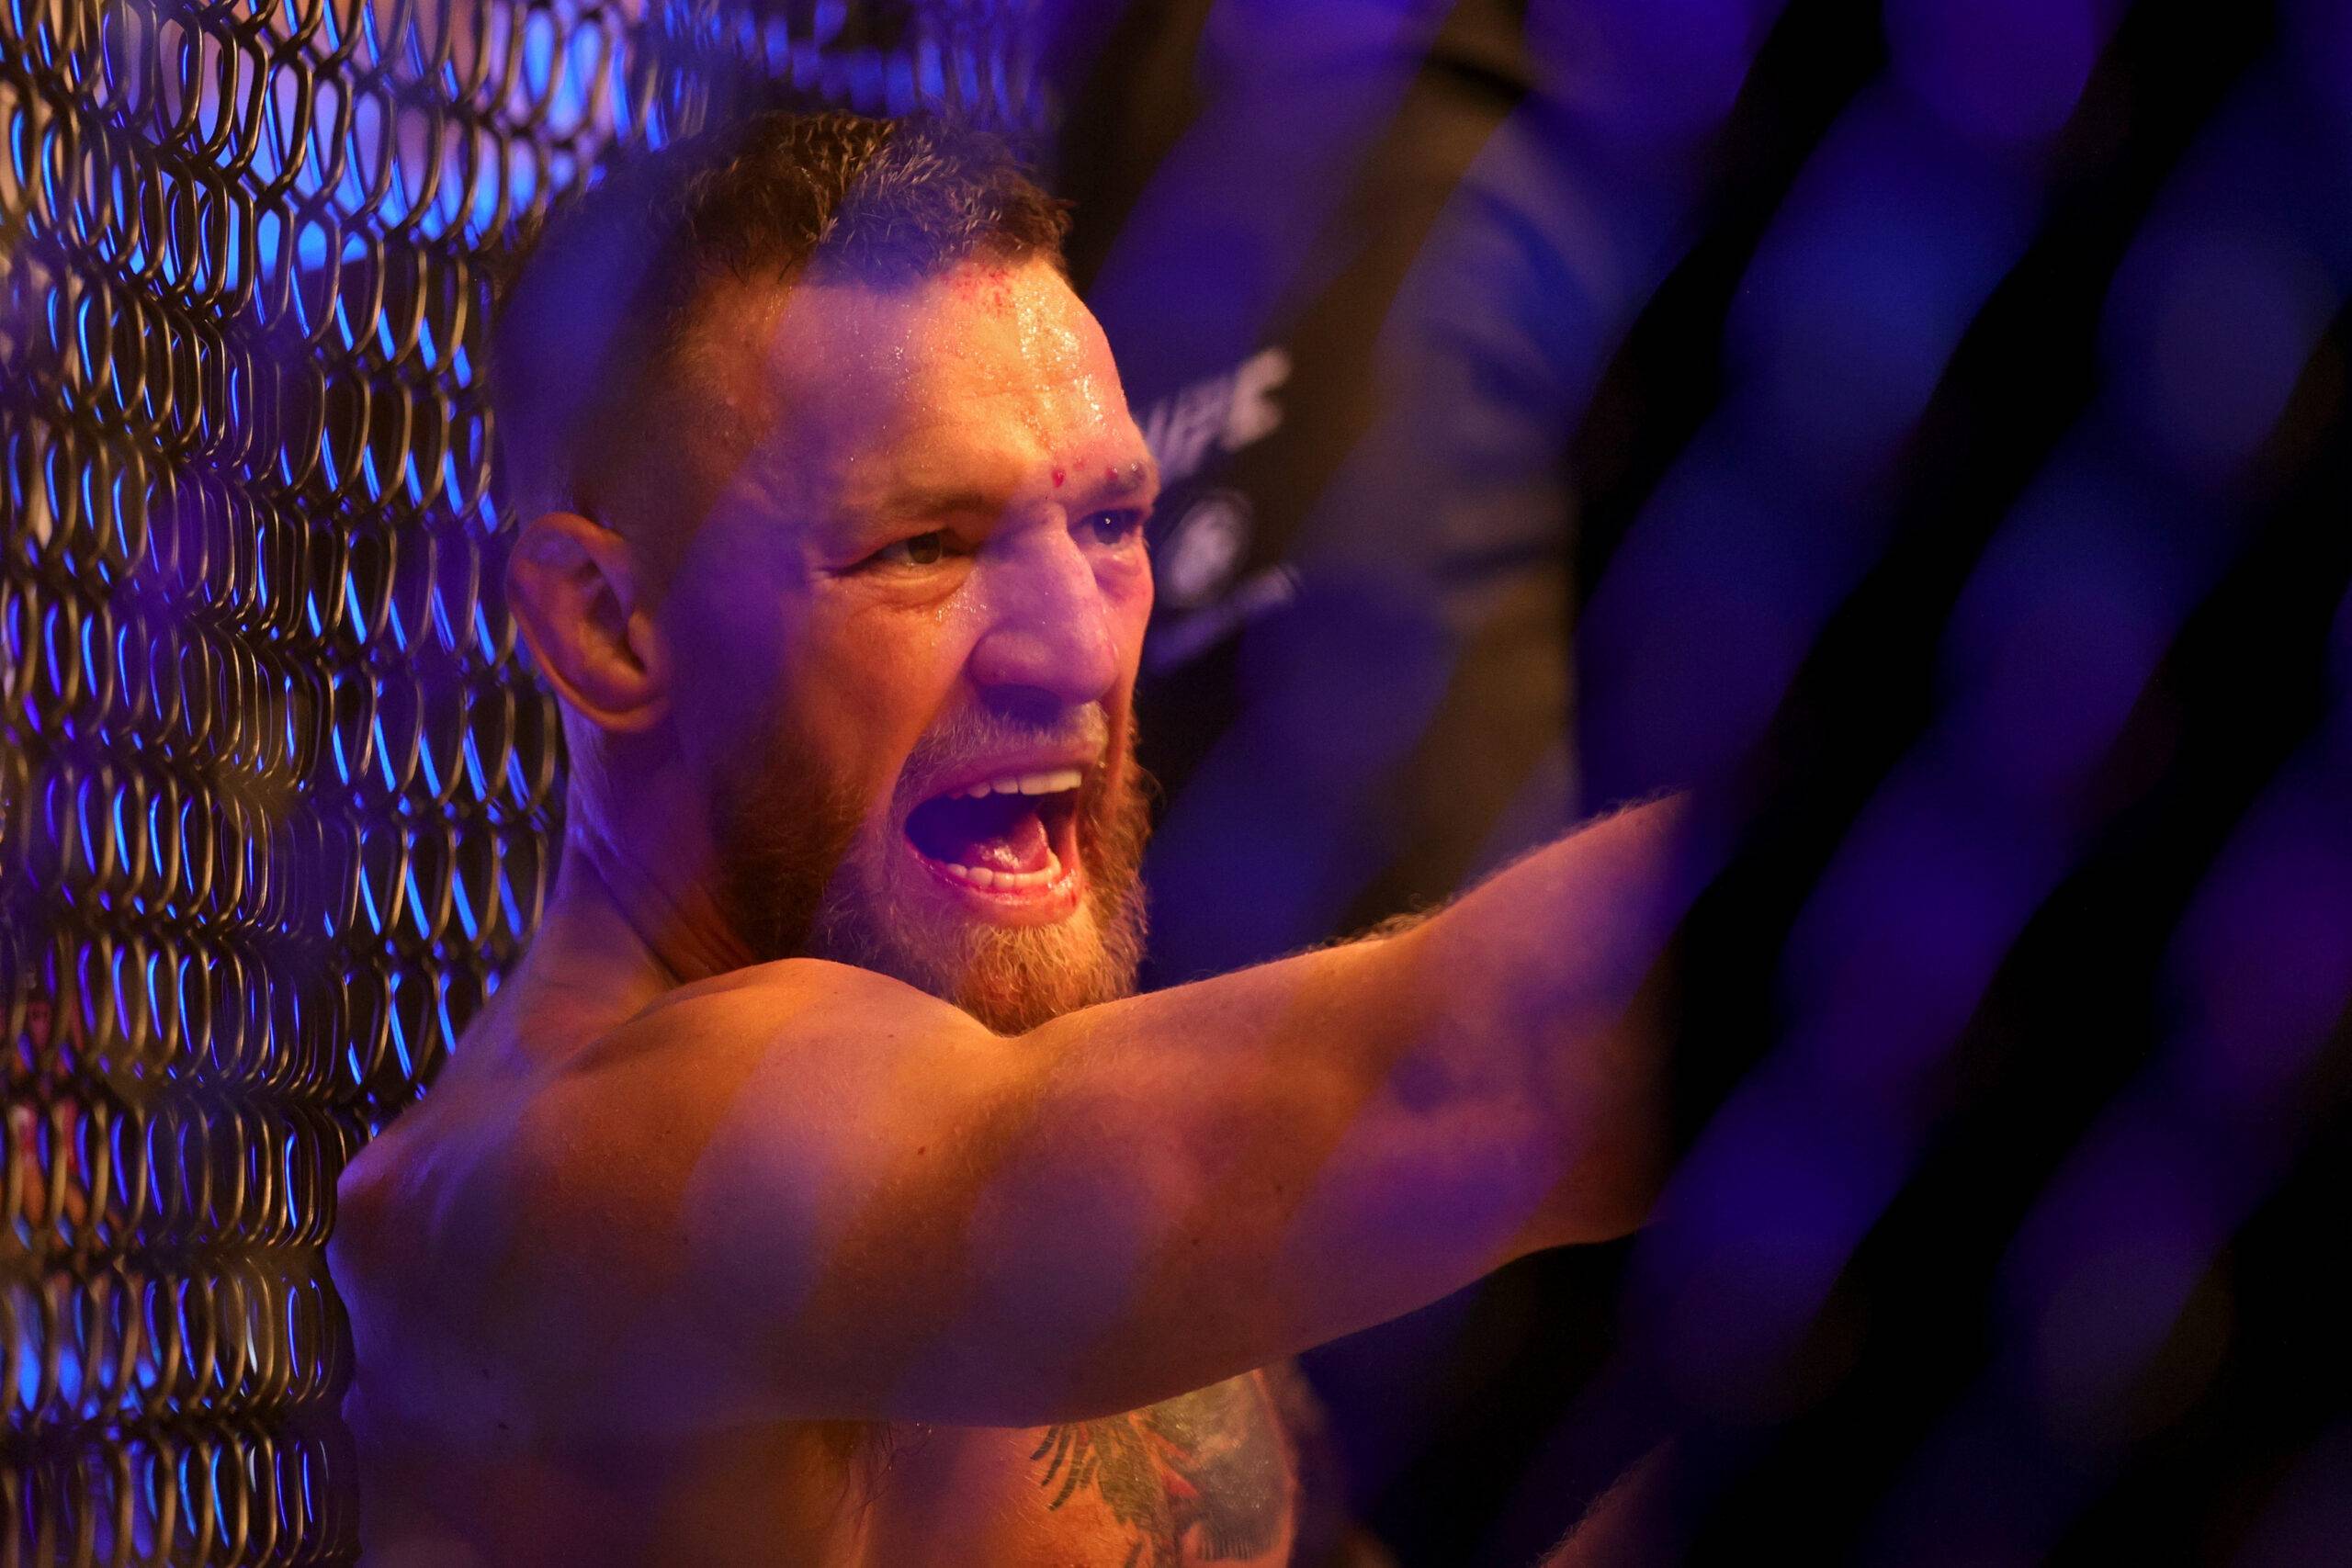 Michael Bisping vs Conor McGregor is the gift that keeps on giving!